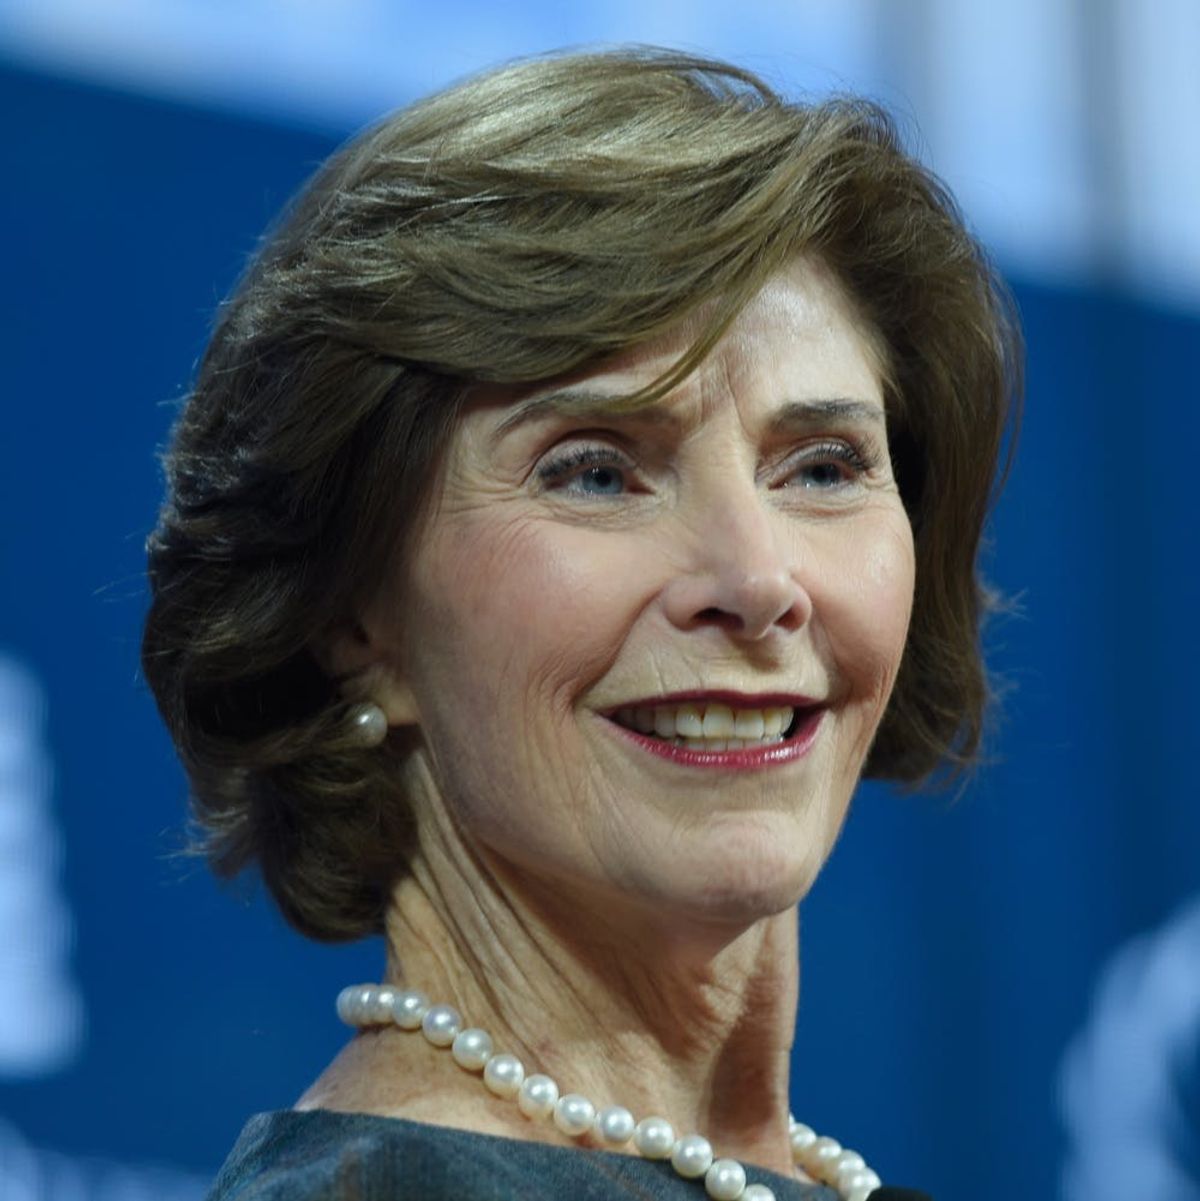 Laura Bush Wrote An Op-Ed Criticizing the Trump Administration’s Family Separation Policy